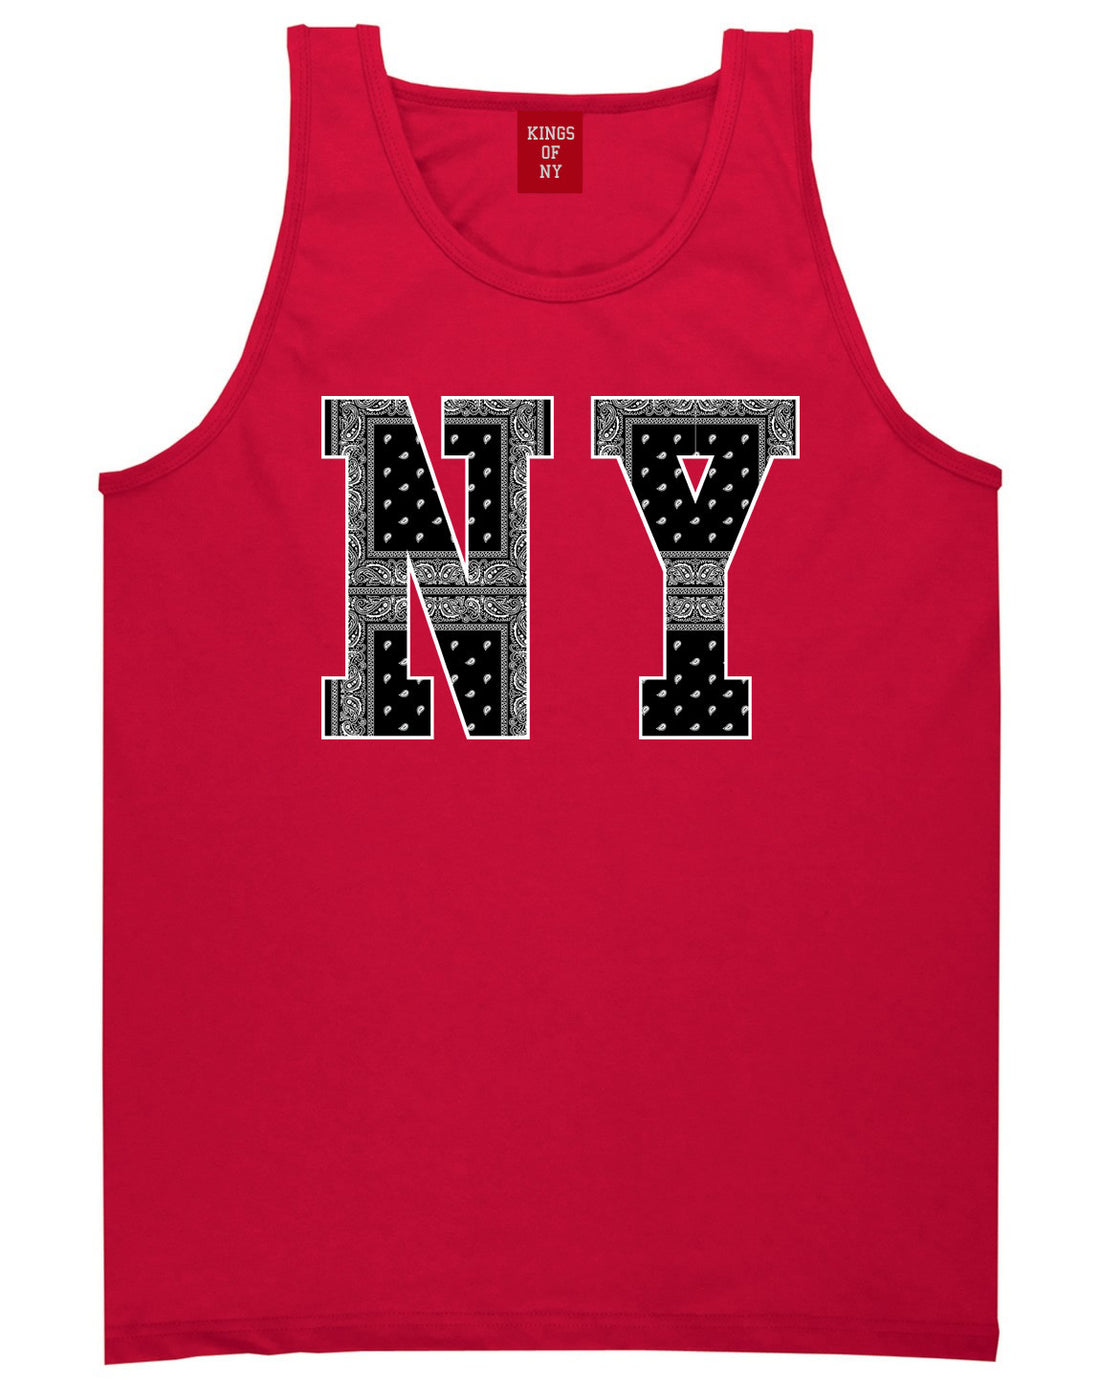 New York Bandana NYC Black by Kings Of NY Gang Flag Tank Top In Red by Kings Of NY